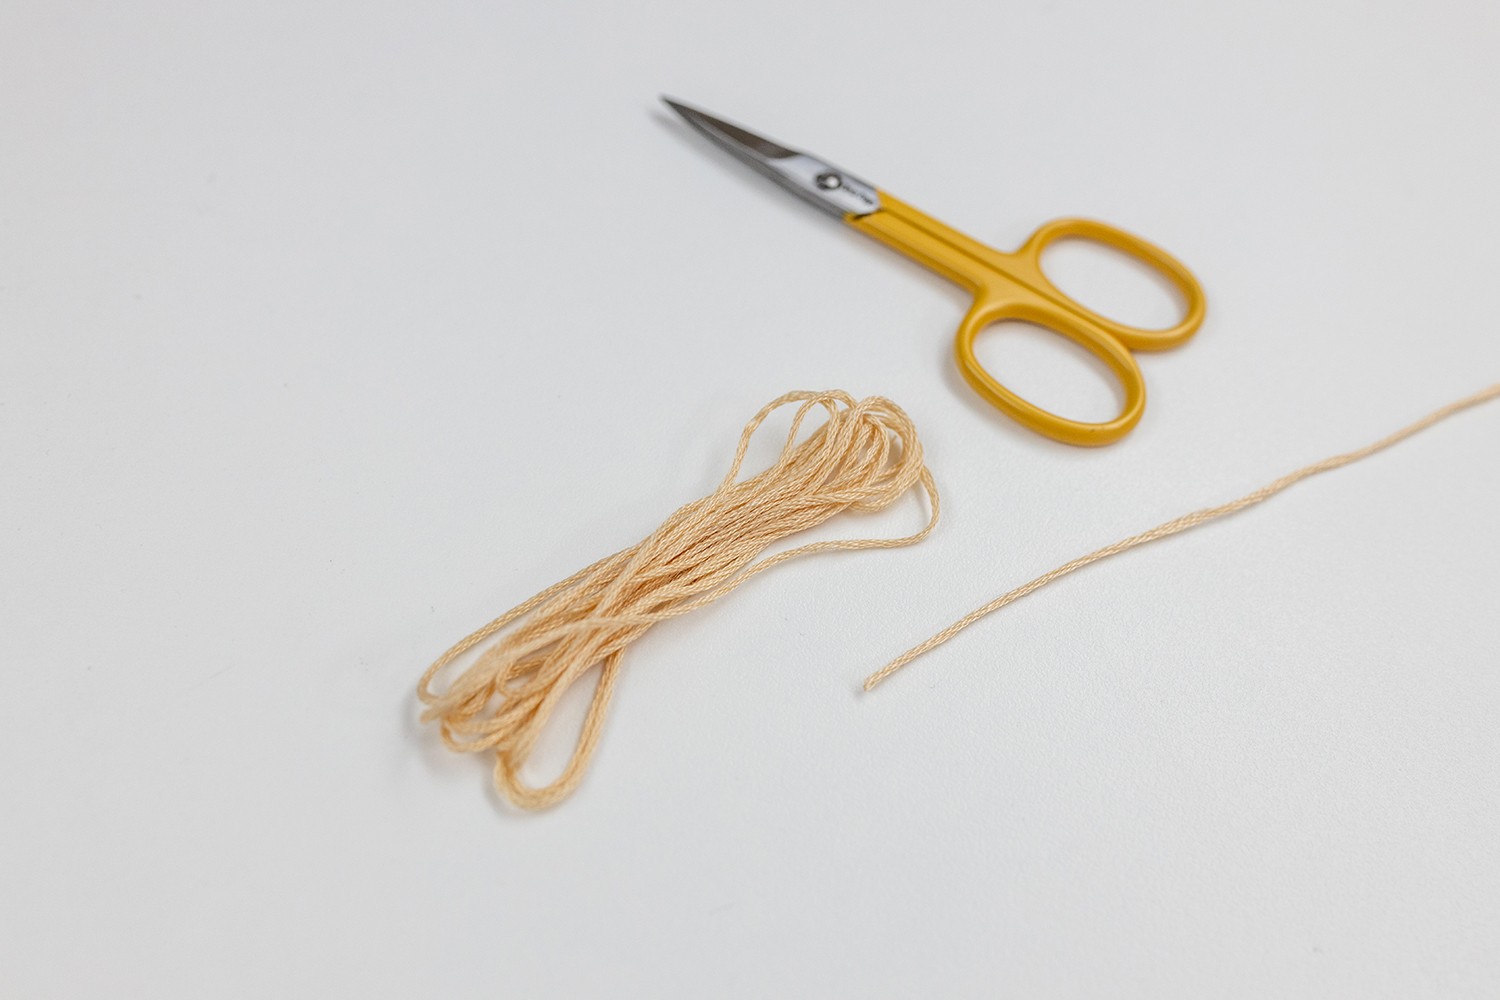 A bundle of thread sits next to a pair of scissors.